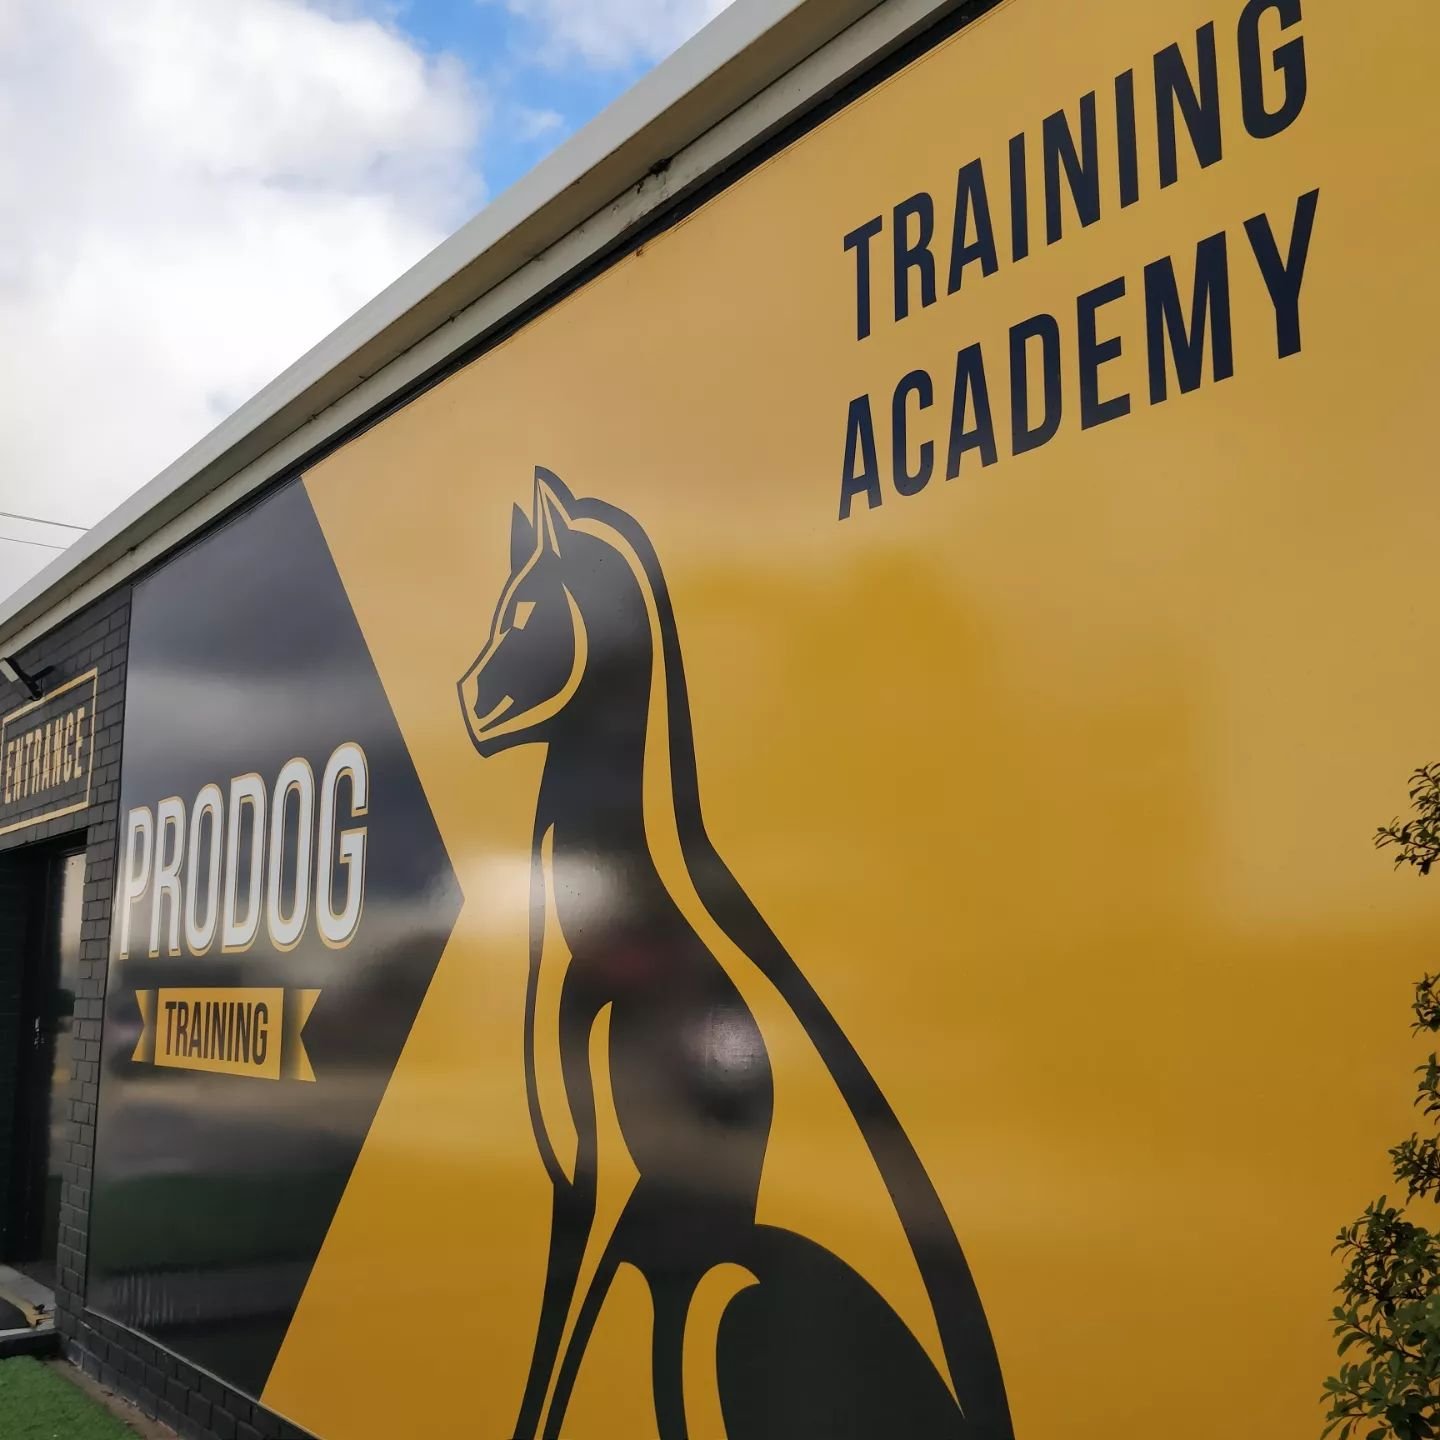 Super stoked to have joined the fine team @prodogtraining!! 
I've followed this highly skilled, professional and leading Melbourne training organisation since it began and am thrilled to be able to train, learn and grow with the staff and clients.

V